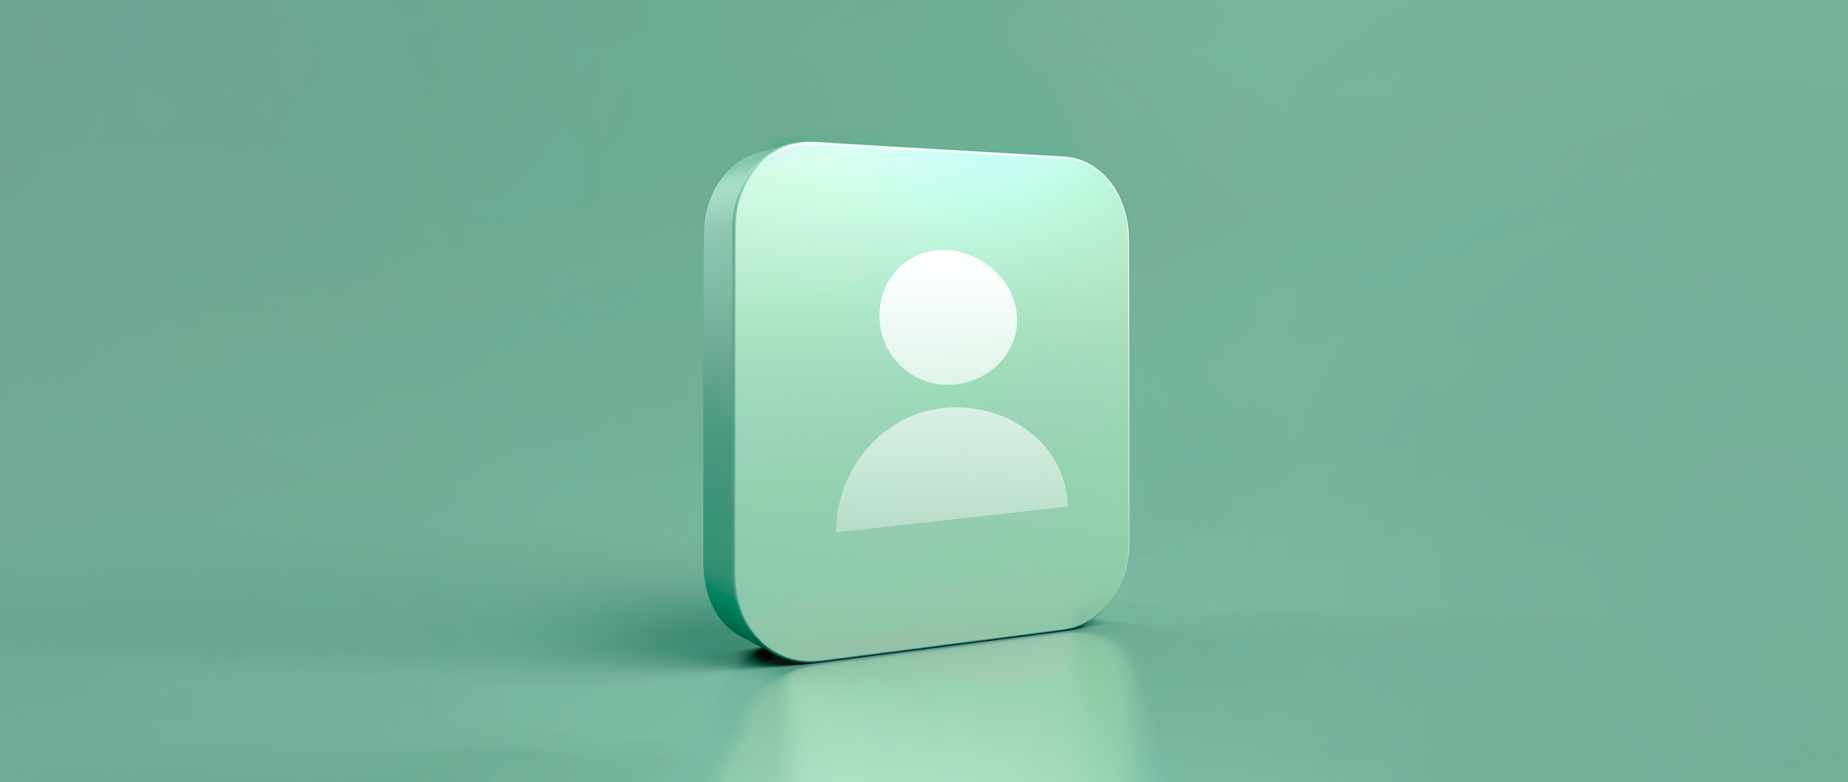 A tile with a profile icon on a green background.